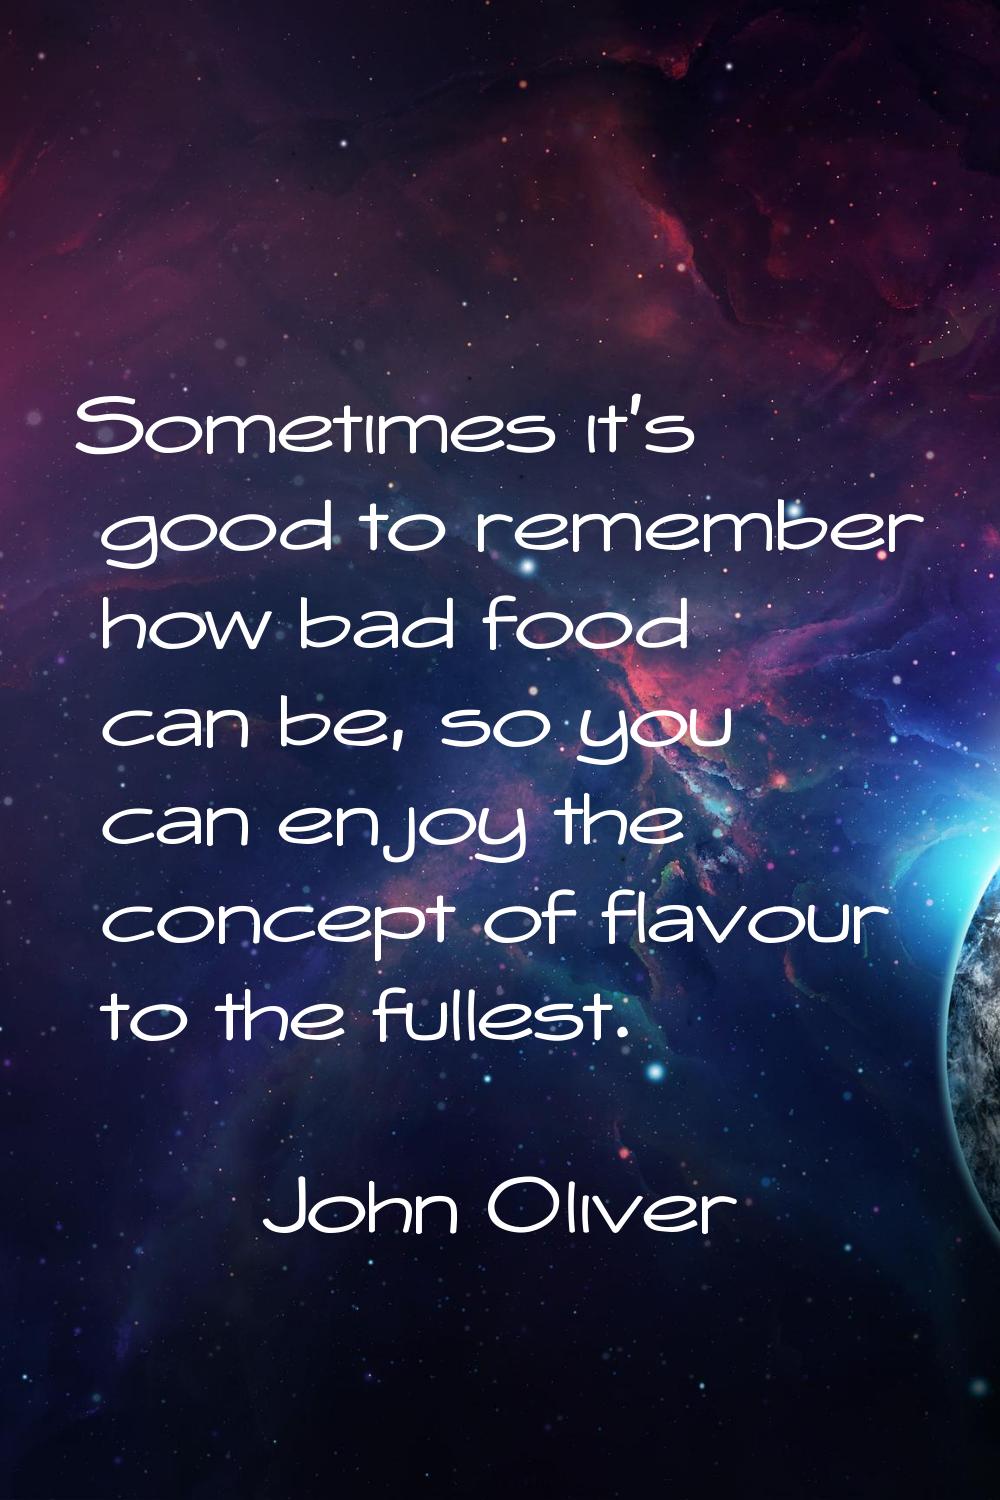 Sometimes it's good to remember how bad food can be, so you can enjoy the concept of flavour to the